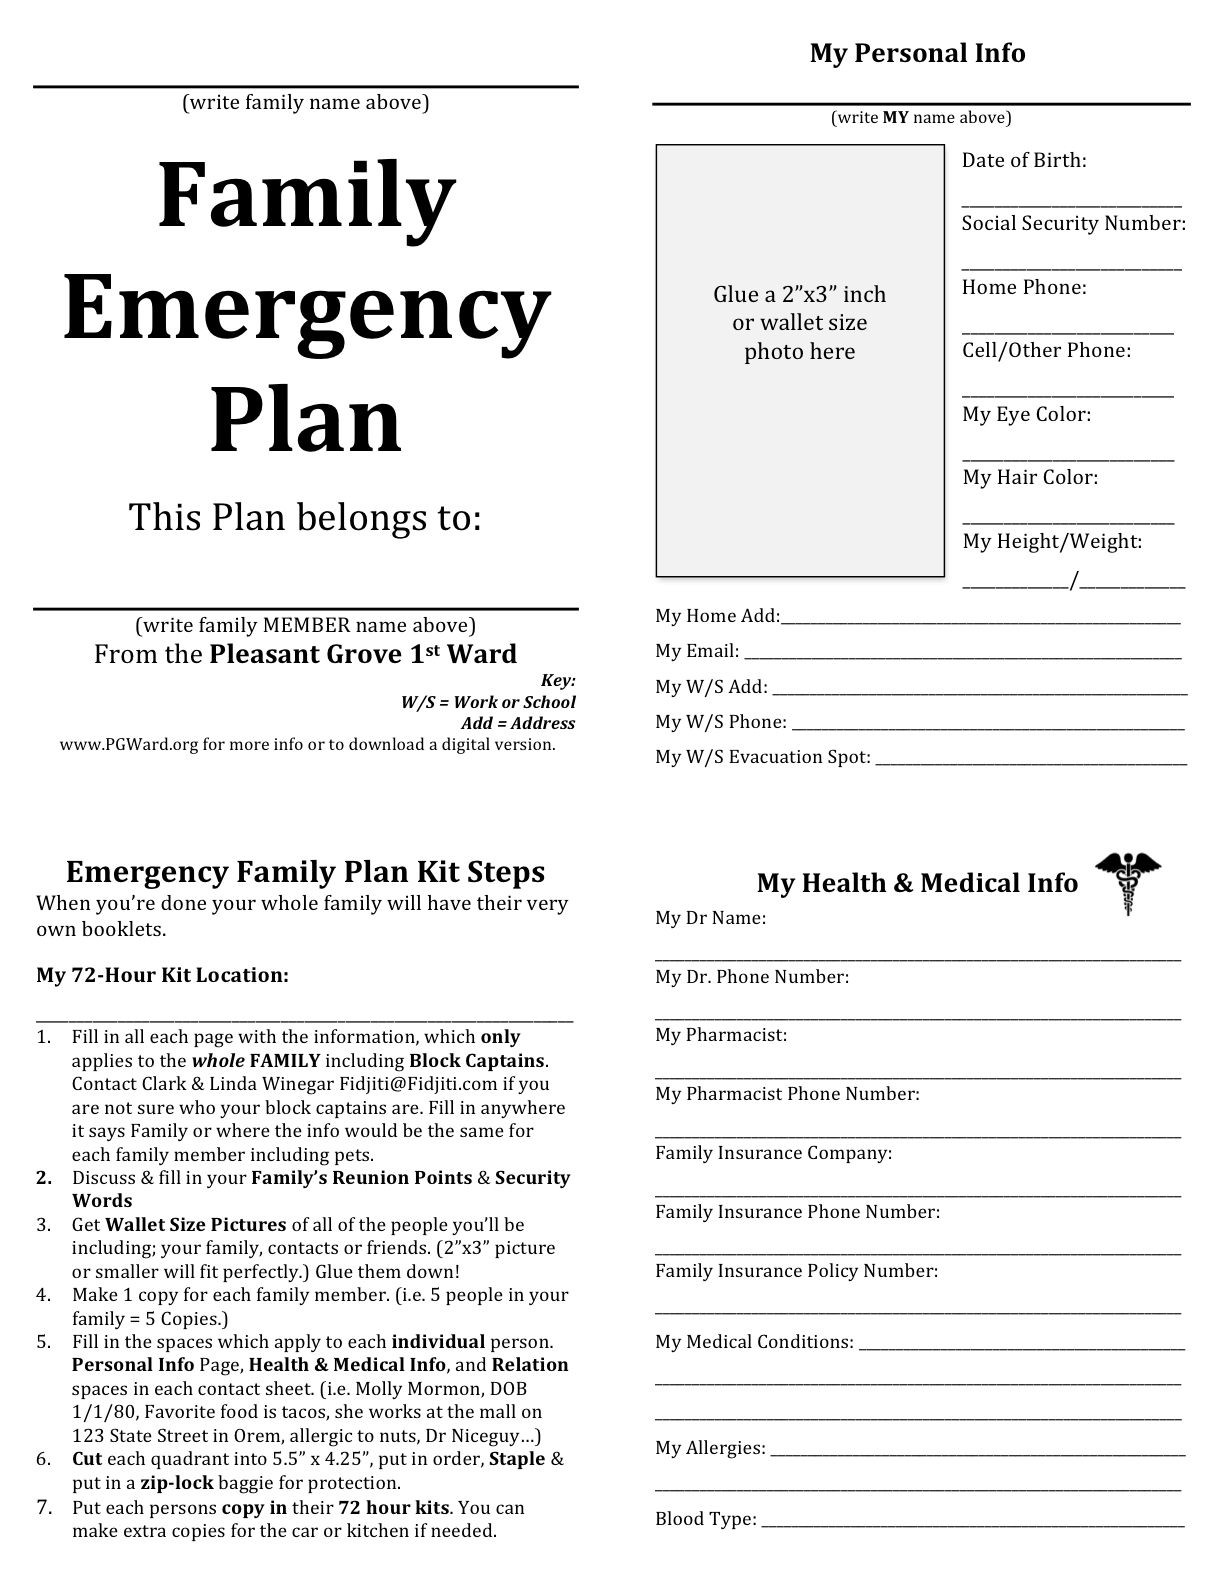 Family Emergency Plan Printable Documents For Your Document Disaster